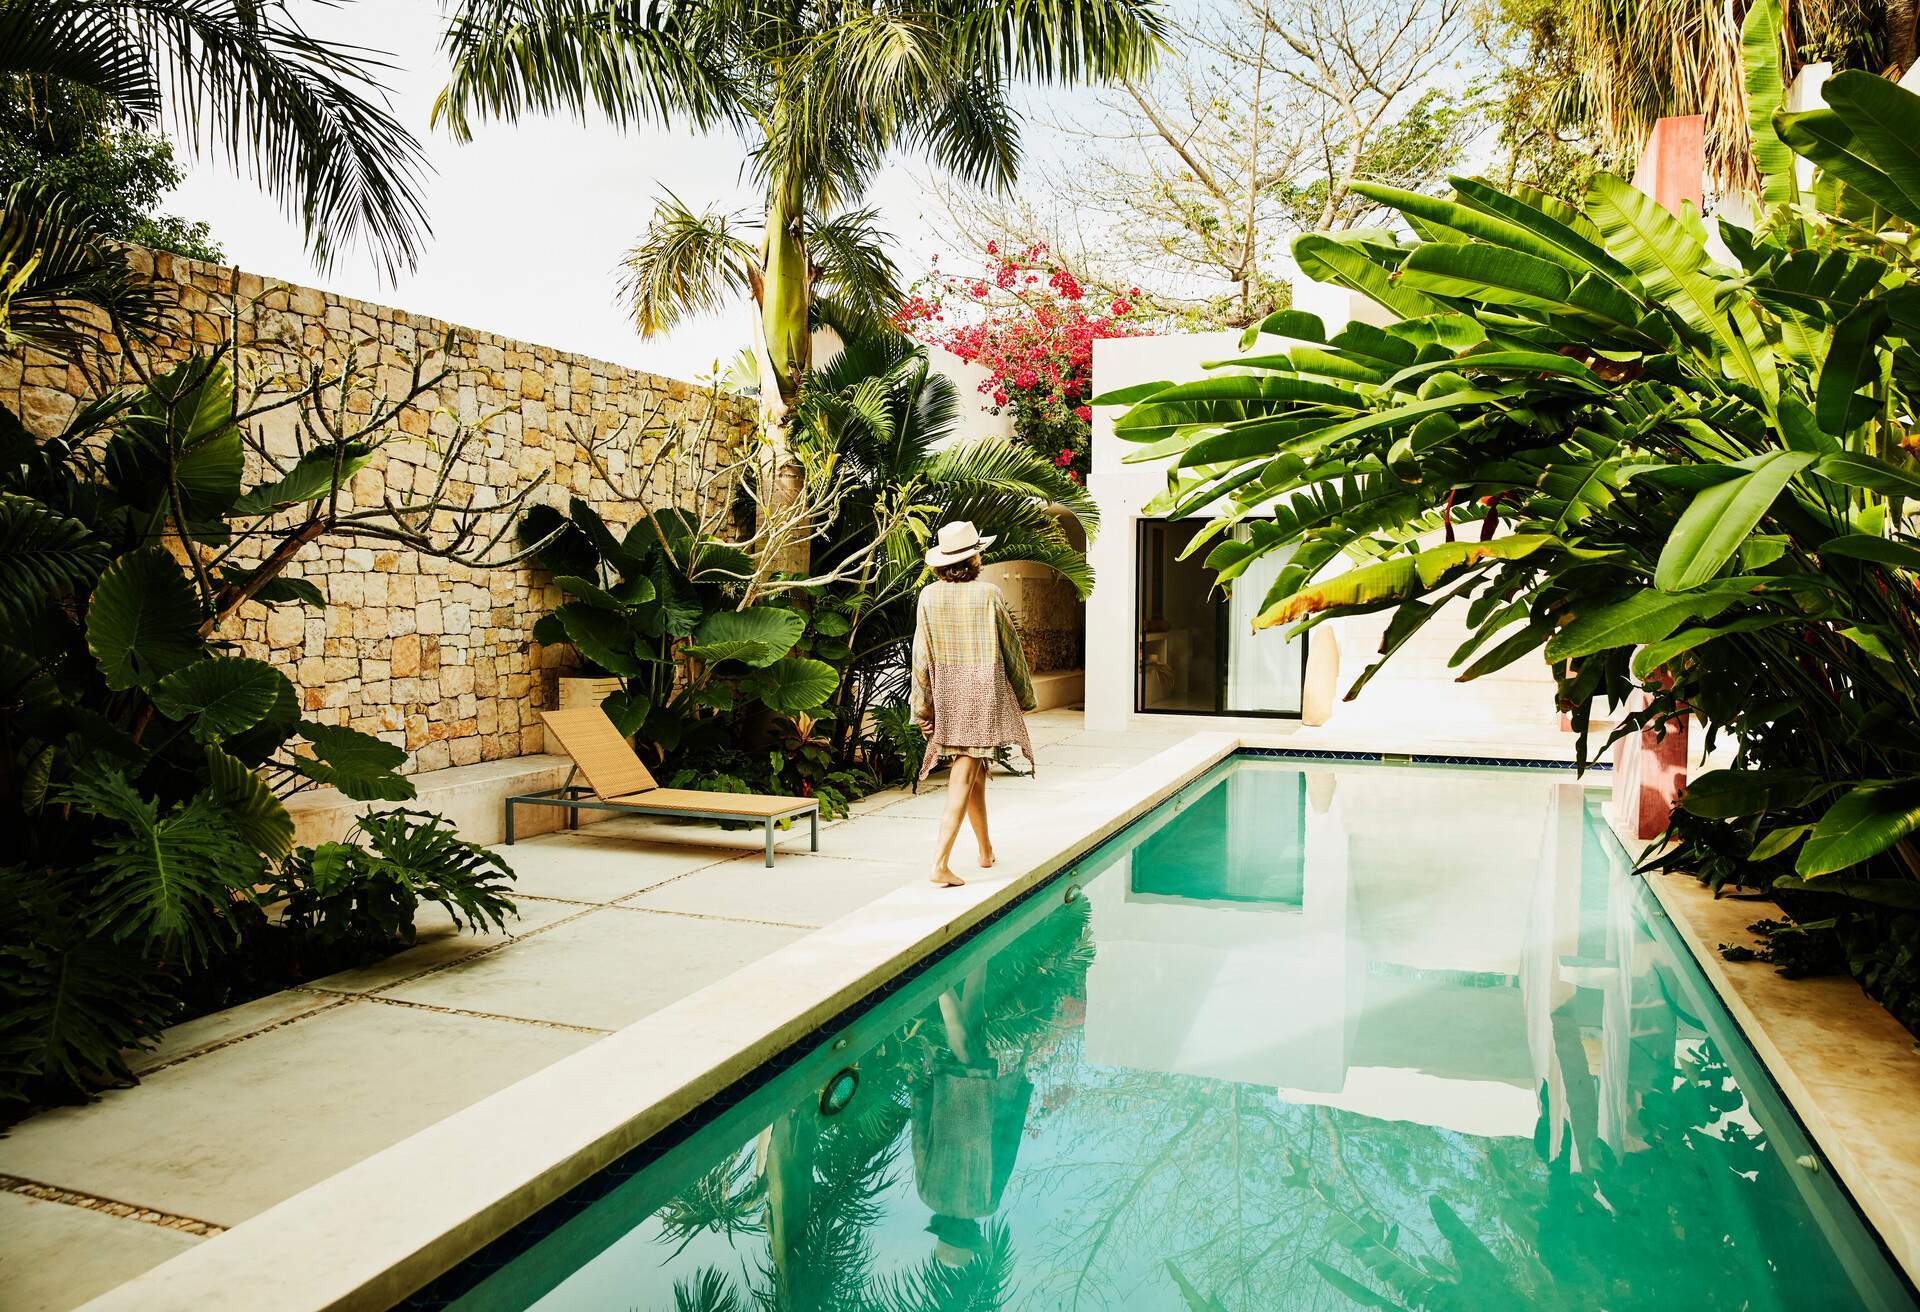 A woman strolls leisurely along the edge of a tranquil pool, with a wall framing the area and adding a touch of privacy and seclusion to the picturesque setting.